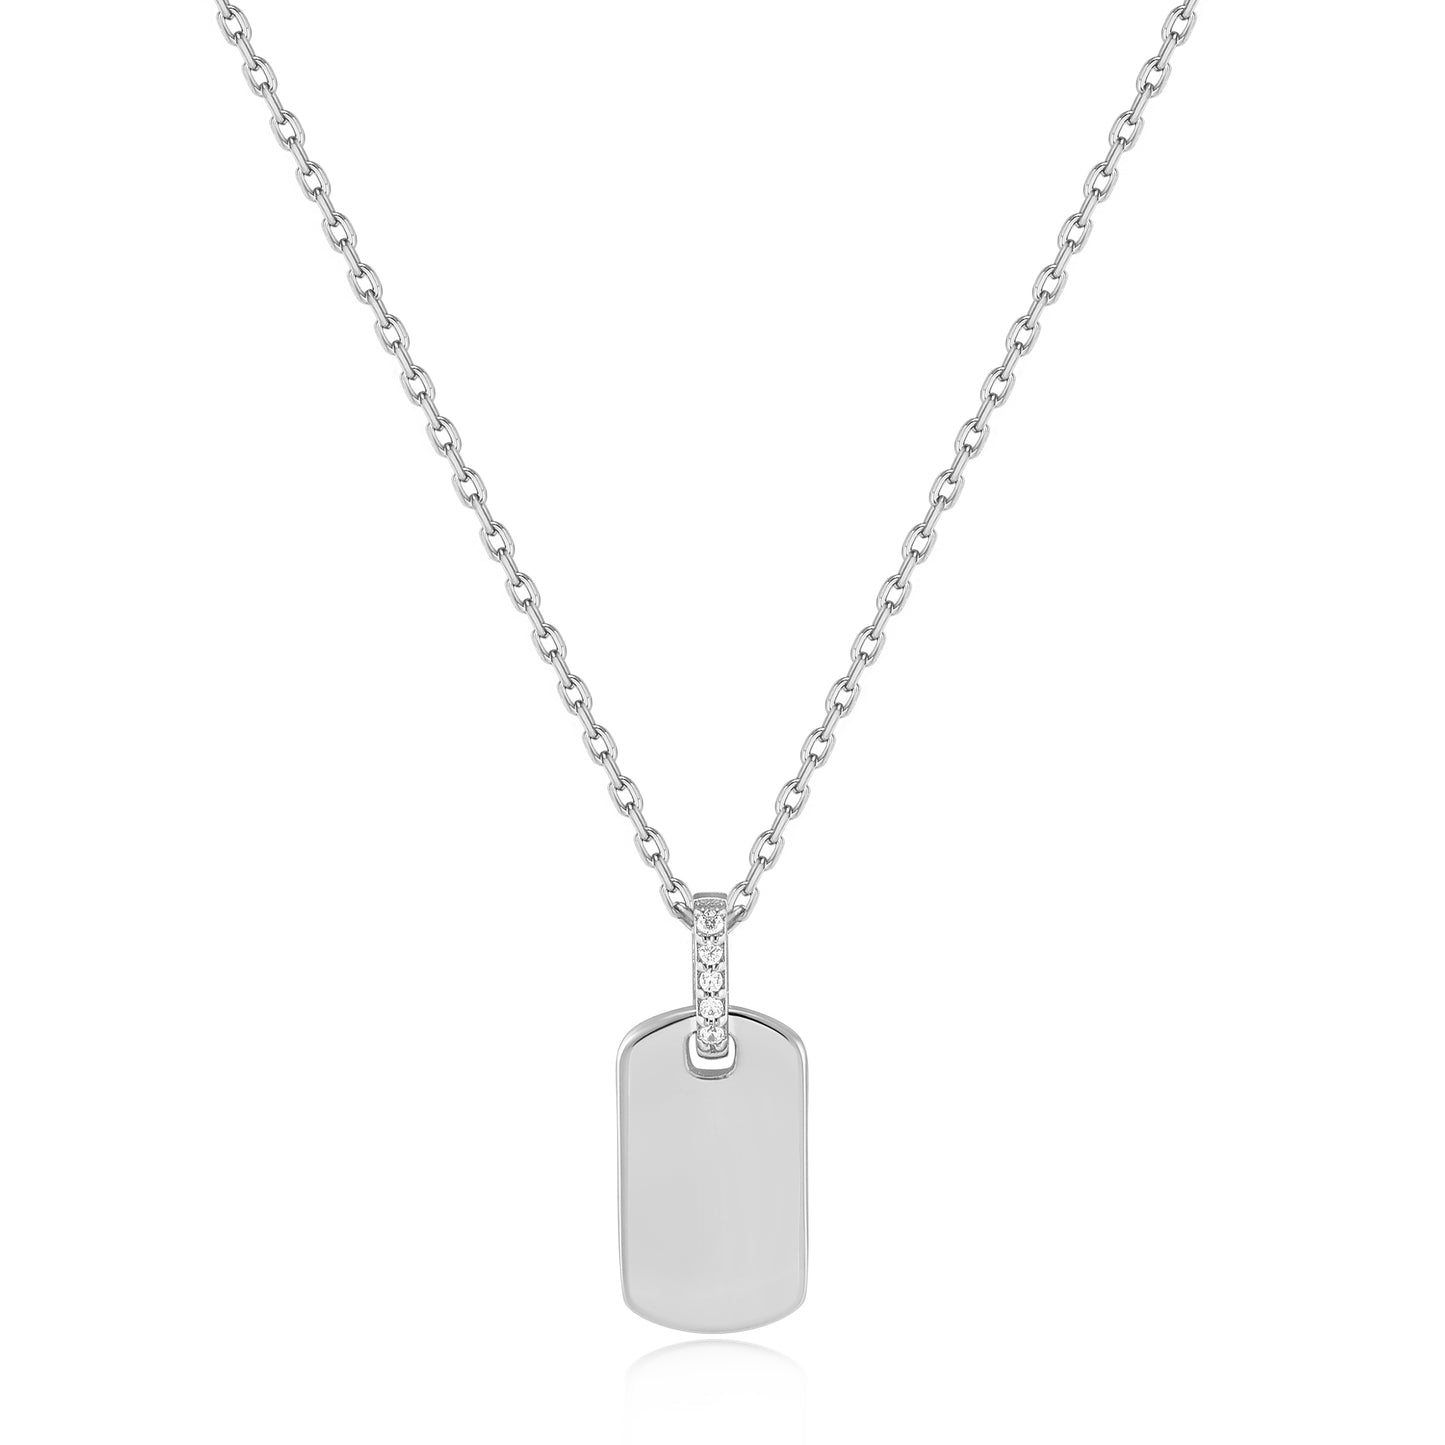 Ania Haie Dog Tag Necklace - Silver Necklace